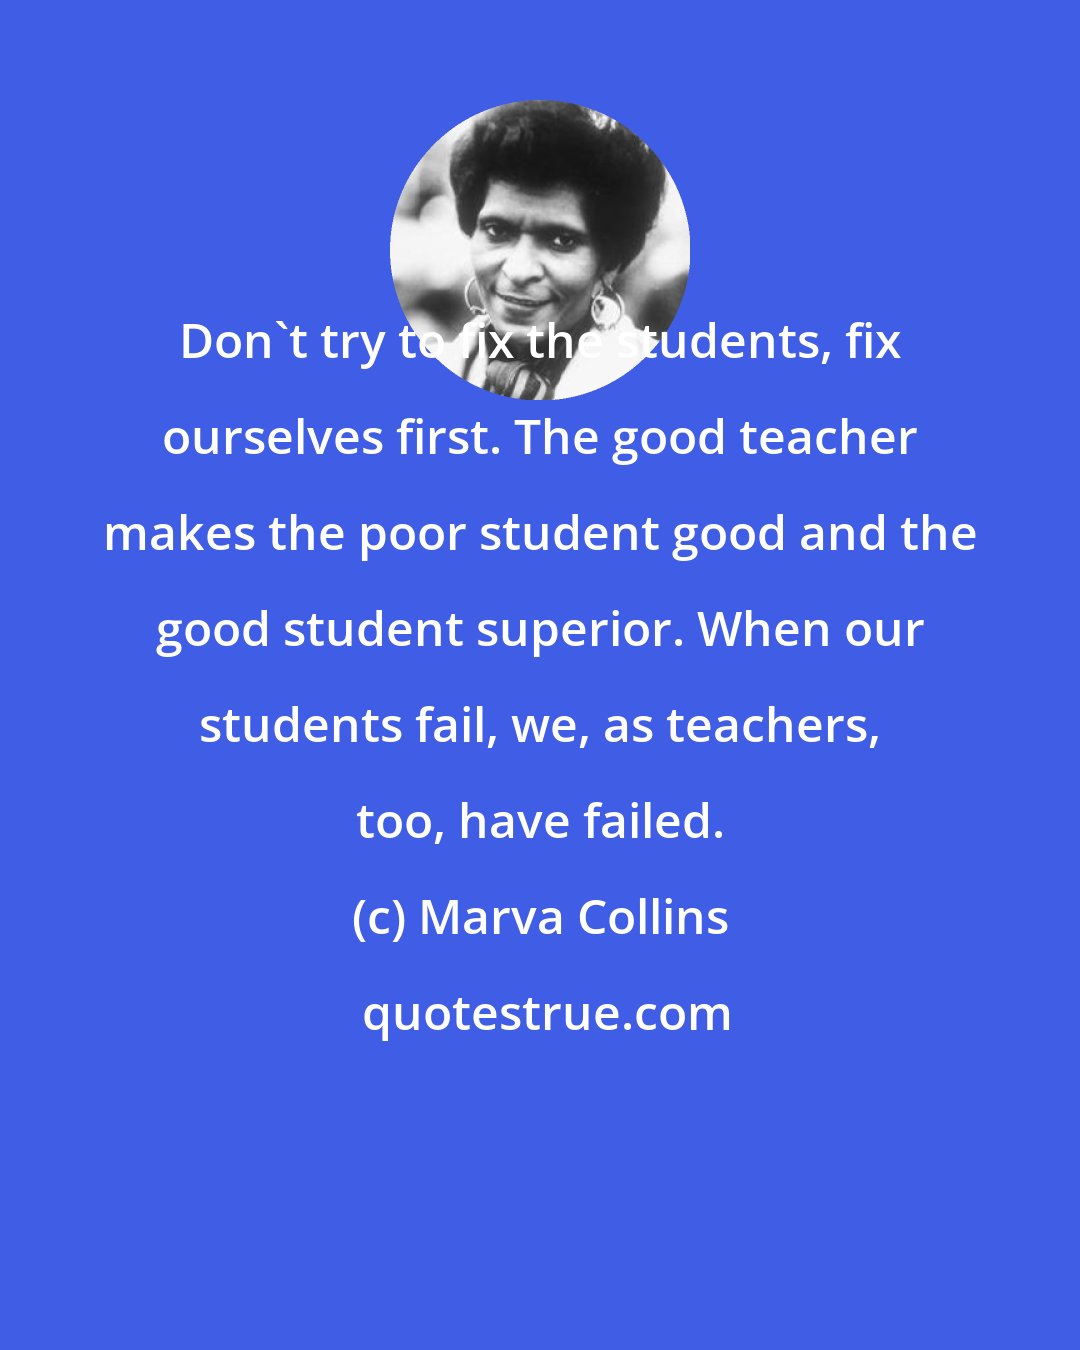 Marva Collins: Don't try to fix the students, fix ourselves first. The good teacher makes the poor student good and the good student superior. When our students fail, we, as teachers, too, have failed.